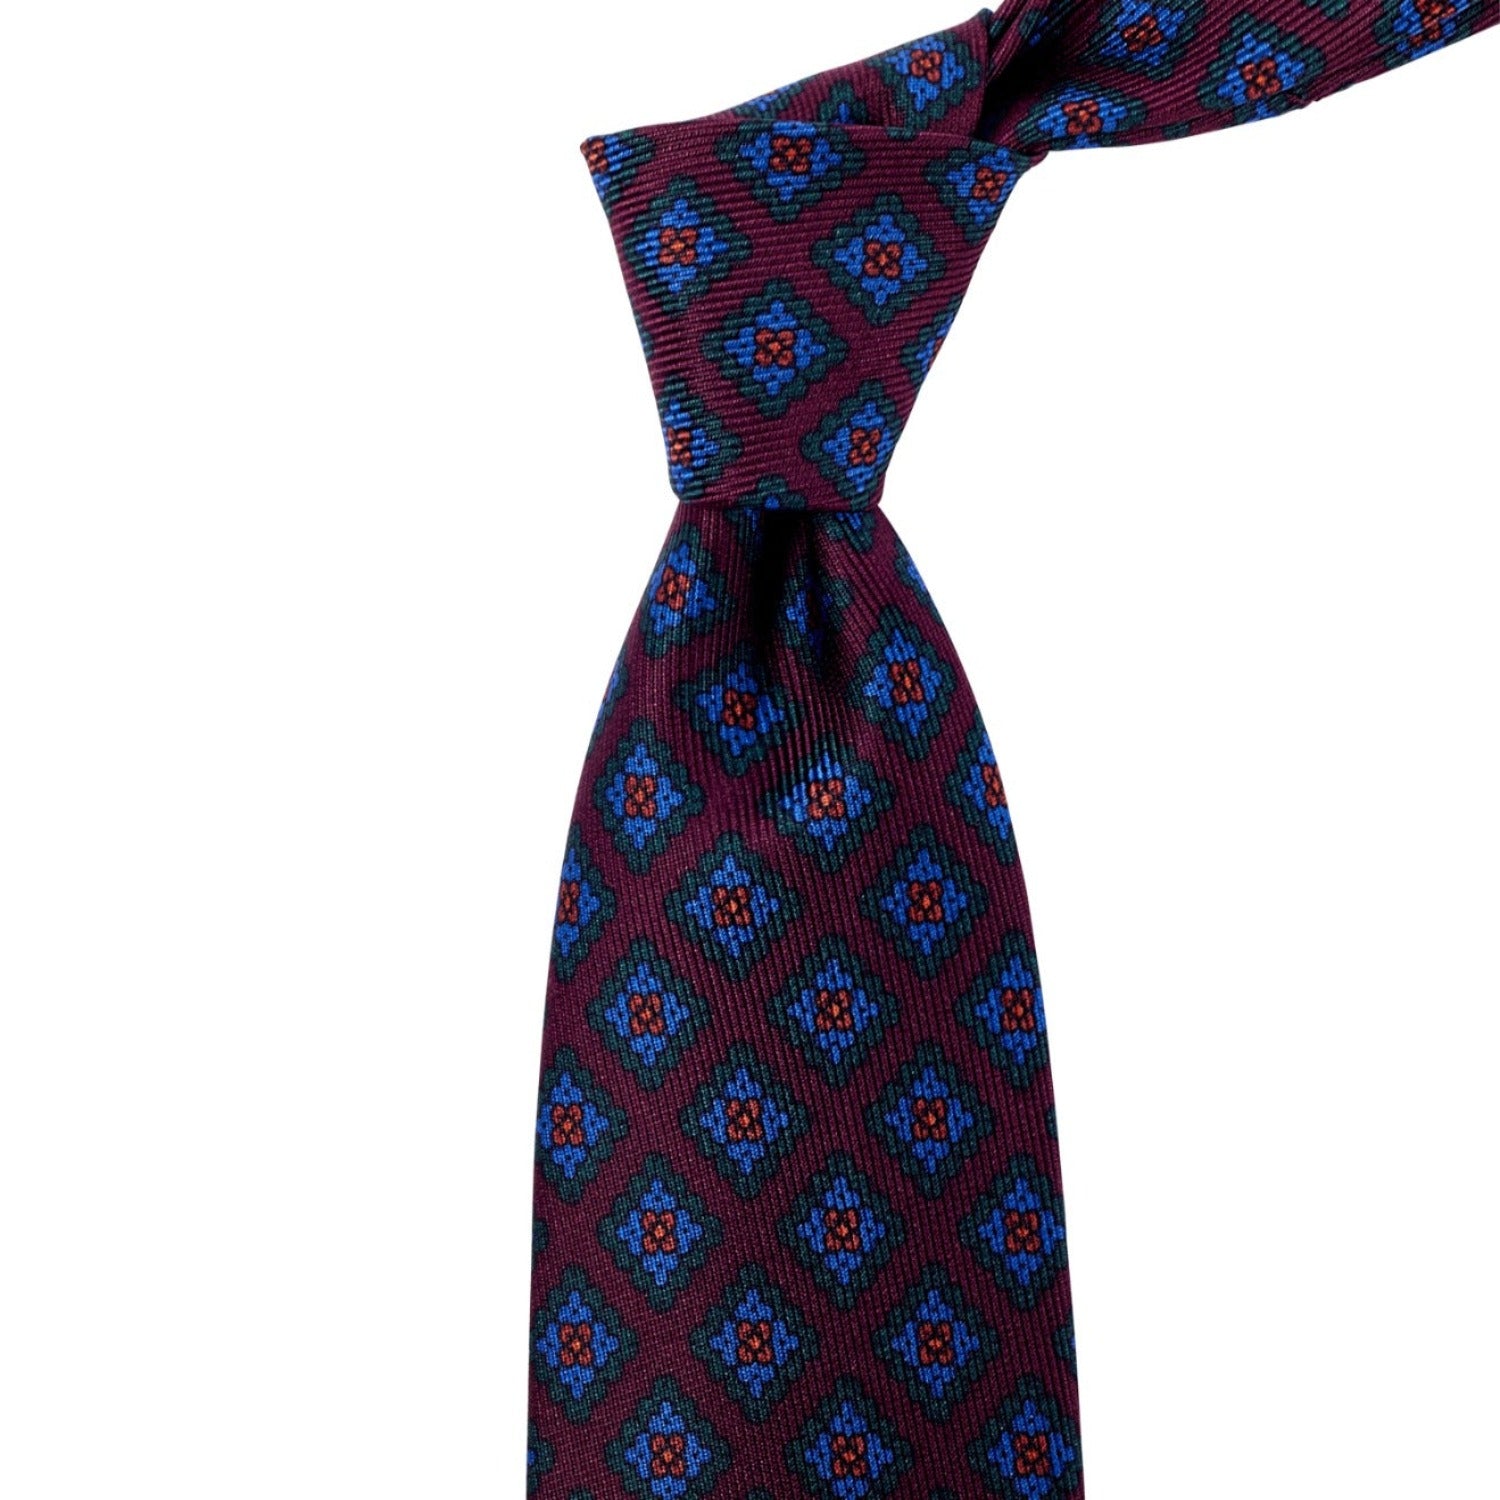 A high-quality Sovereign Grade Burgundy Diamond Ancient Madder Silk Tie from KirbyAllison.com, handmade with great craftsmanship and features a geometric pattern.